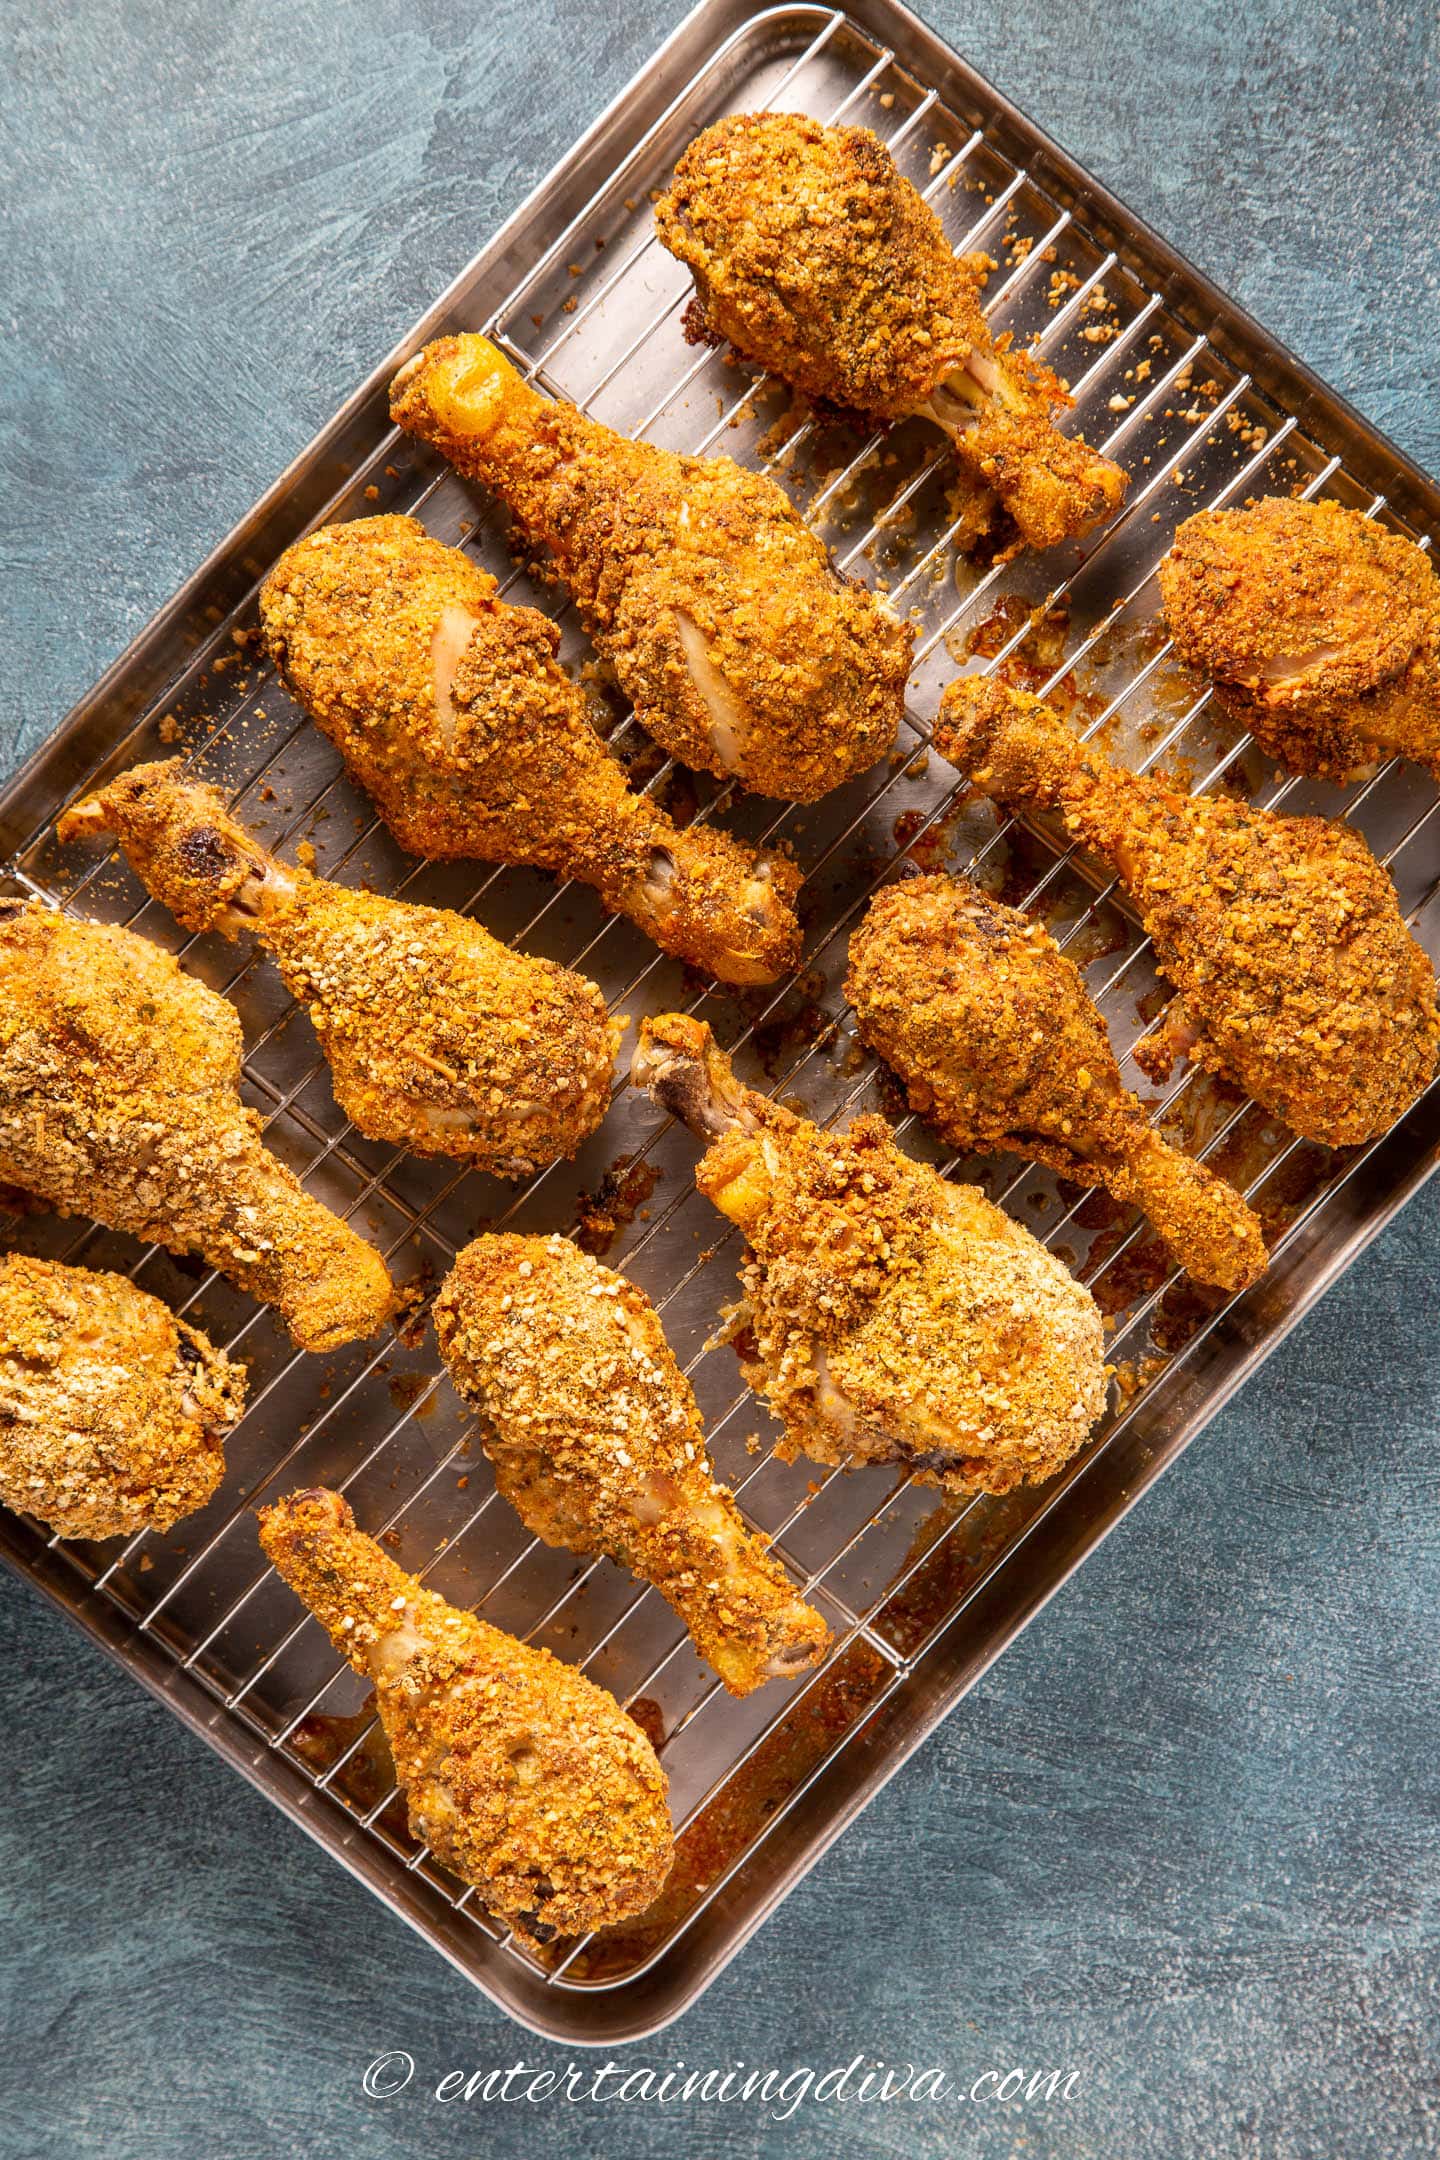 oven baked breaded chicken legs on a baking sheet after coming out of the oven